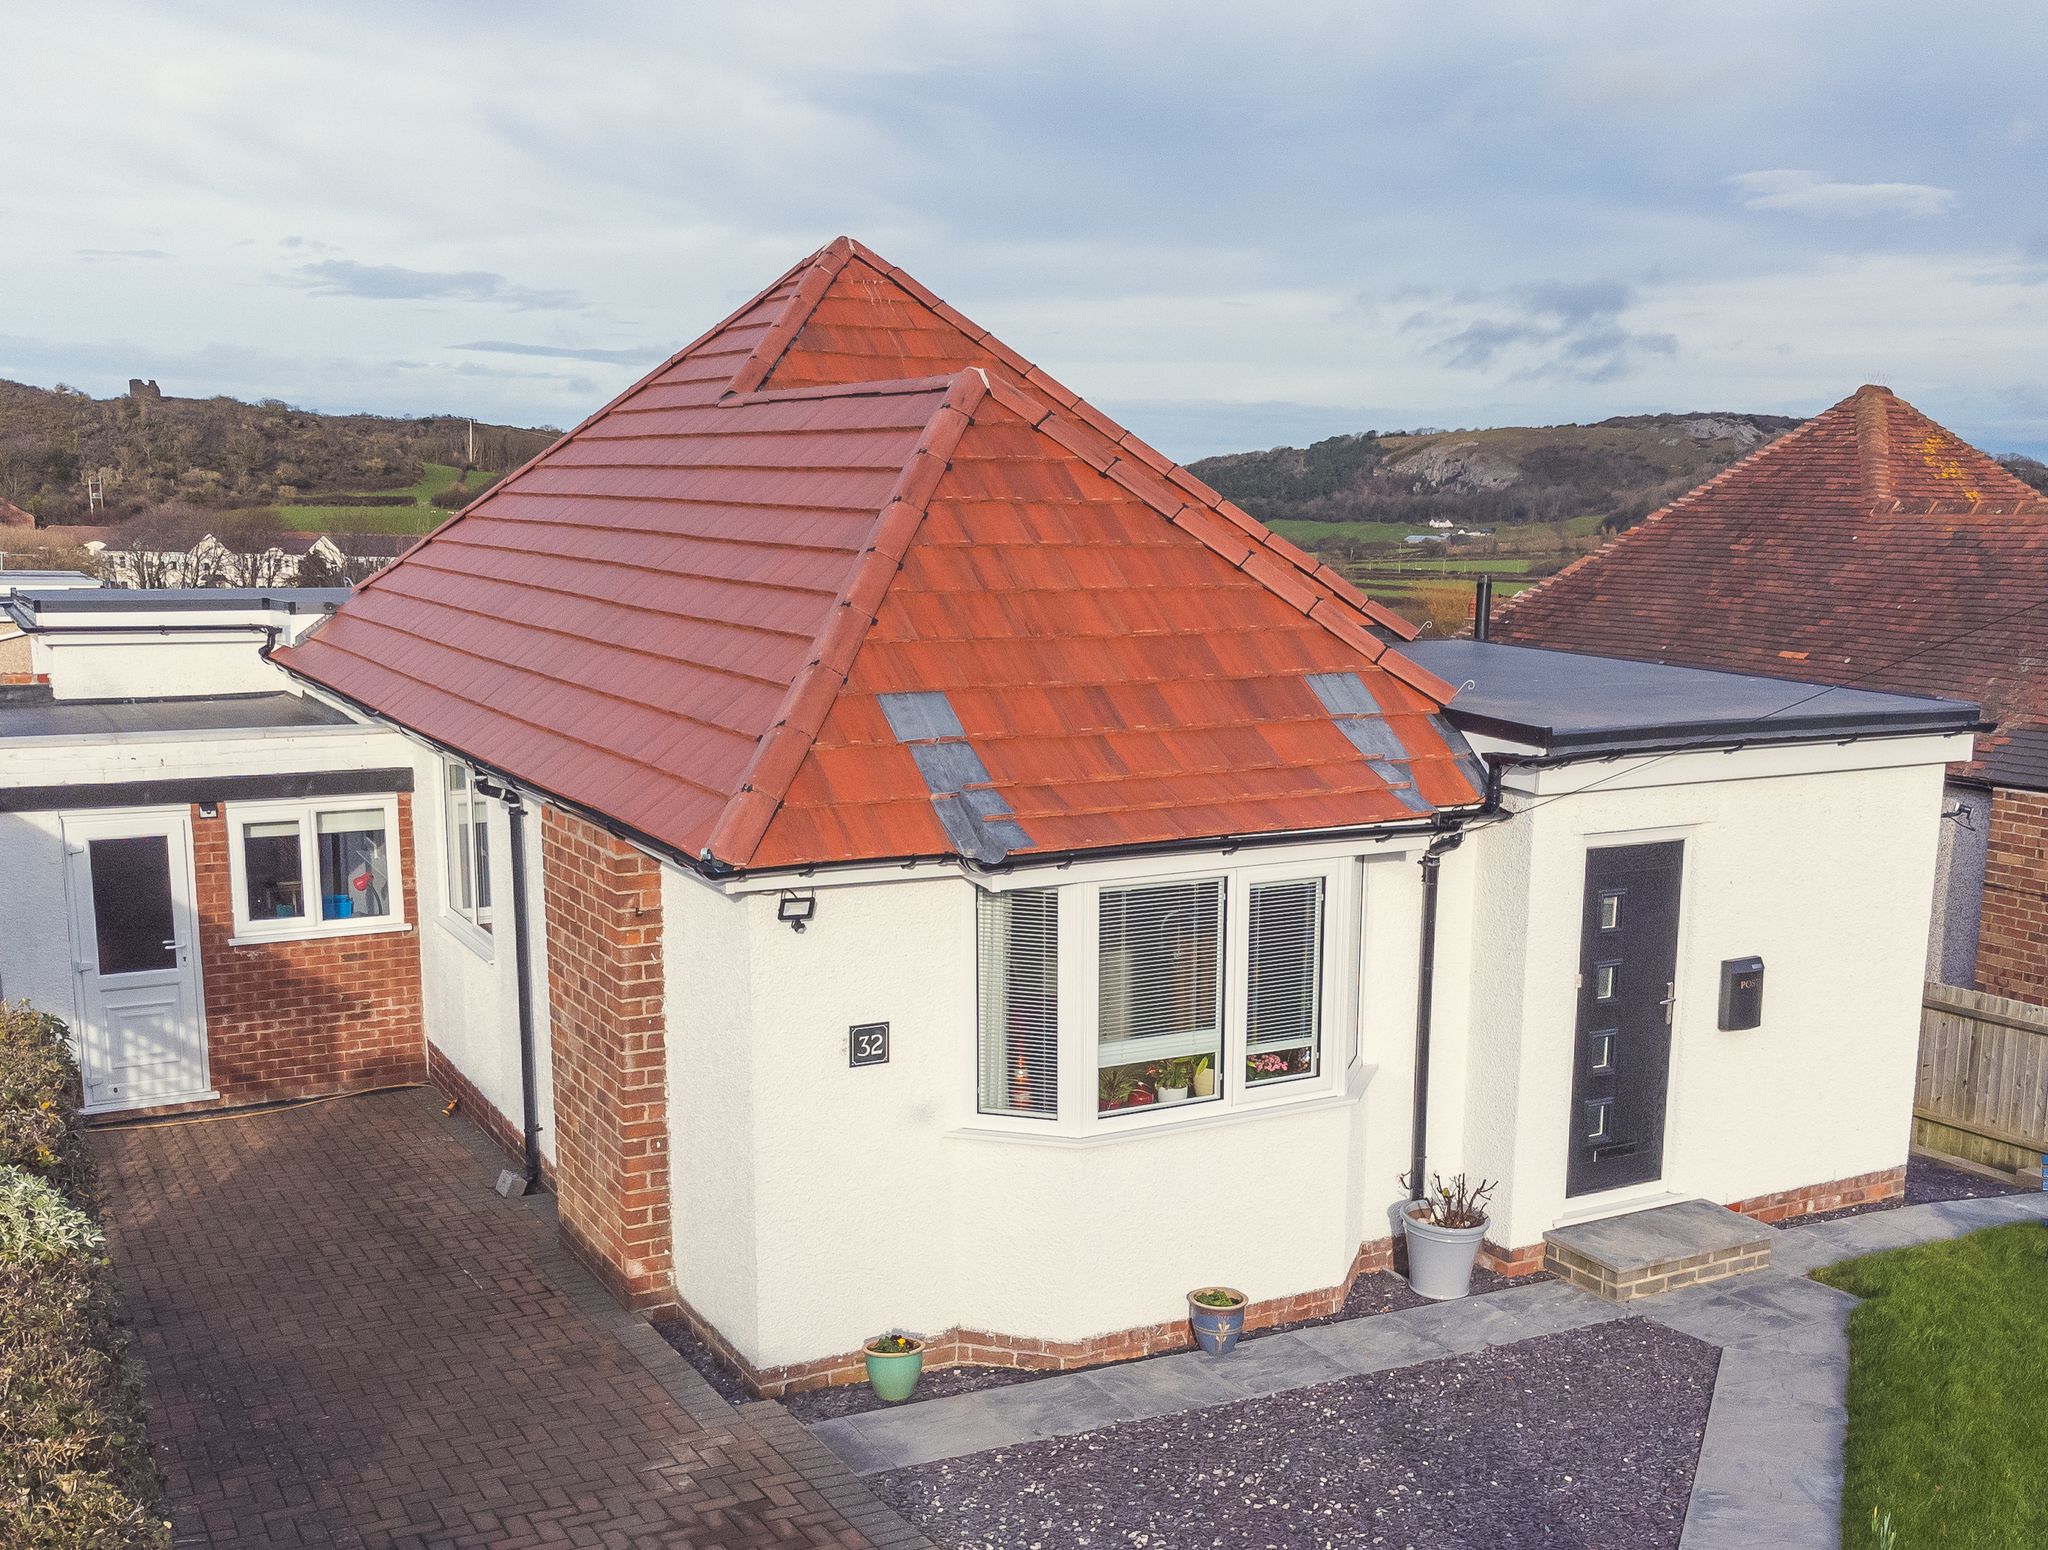 Tile Roof Contractors Rhyd-Ddu, LL54 - DD Roofing